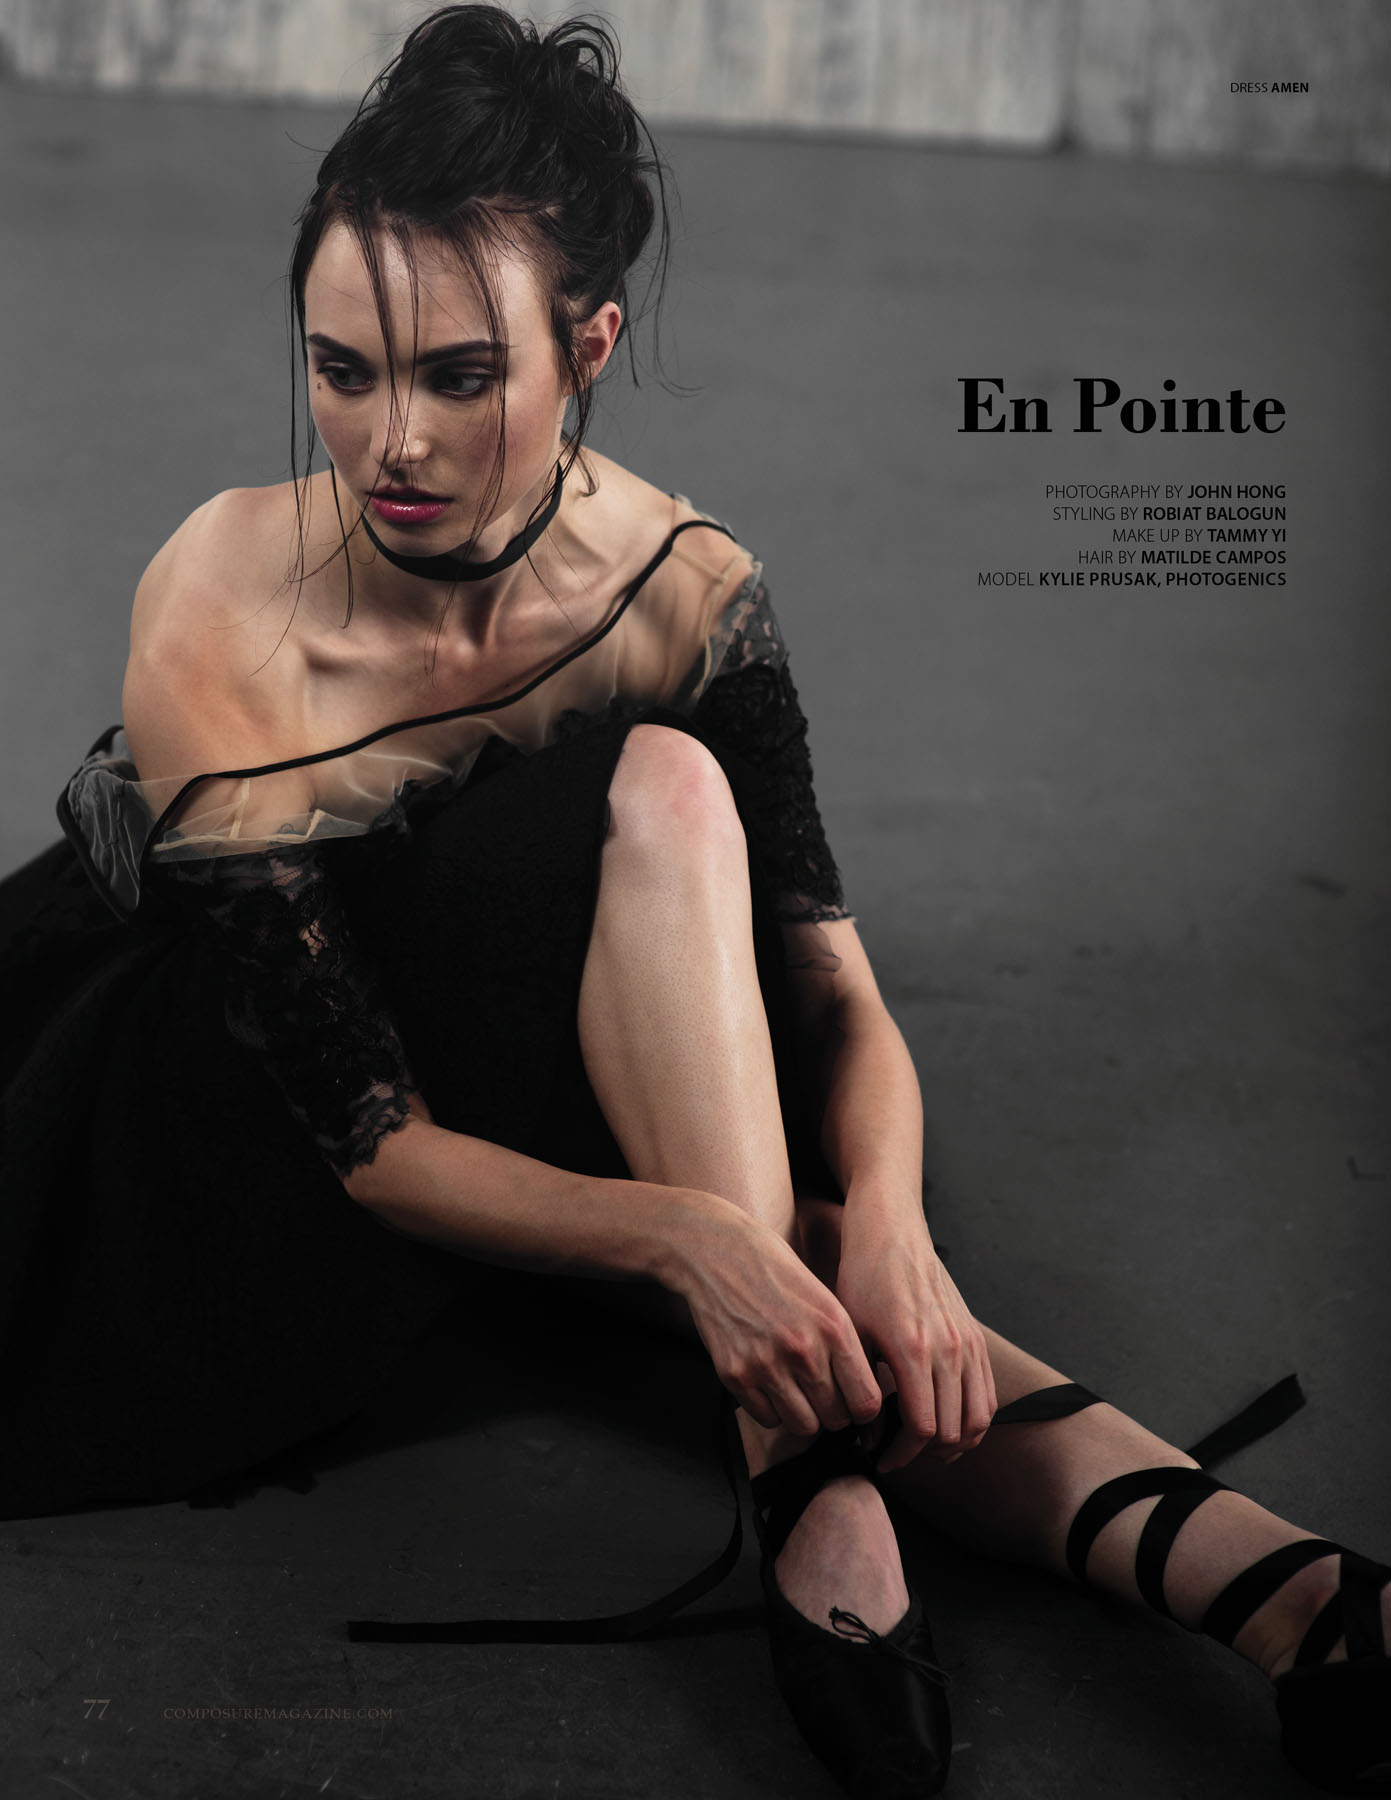 Fashion Editorial by photographer John Hong with model Kylie Prusak